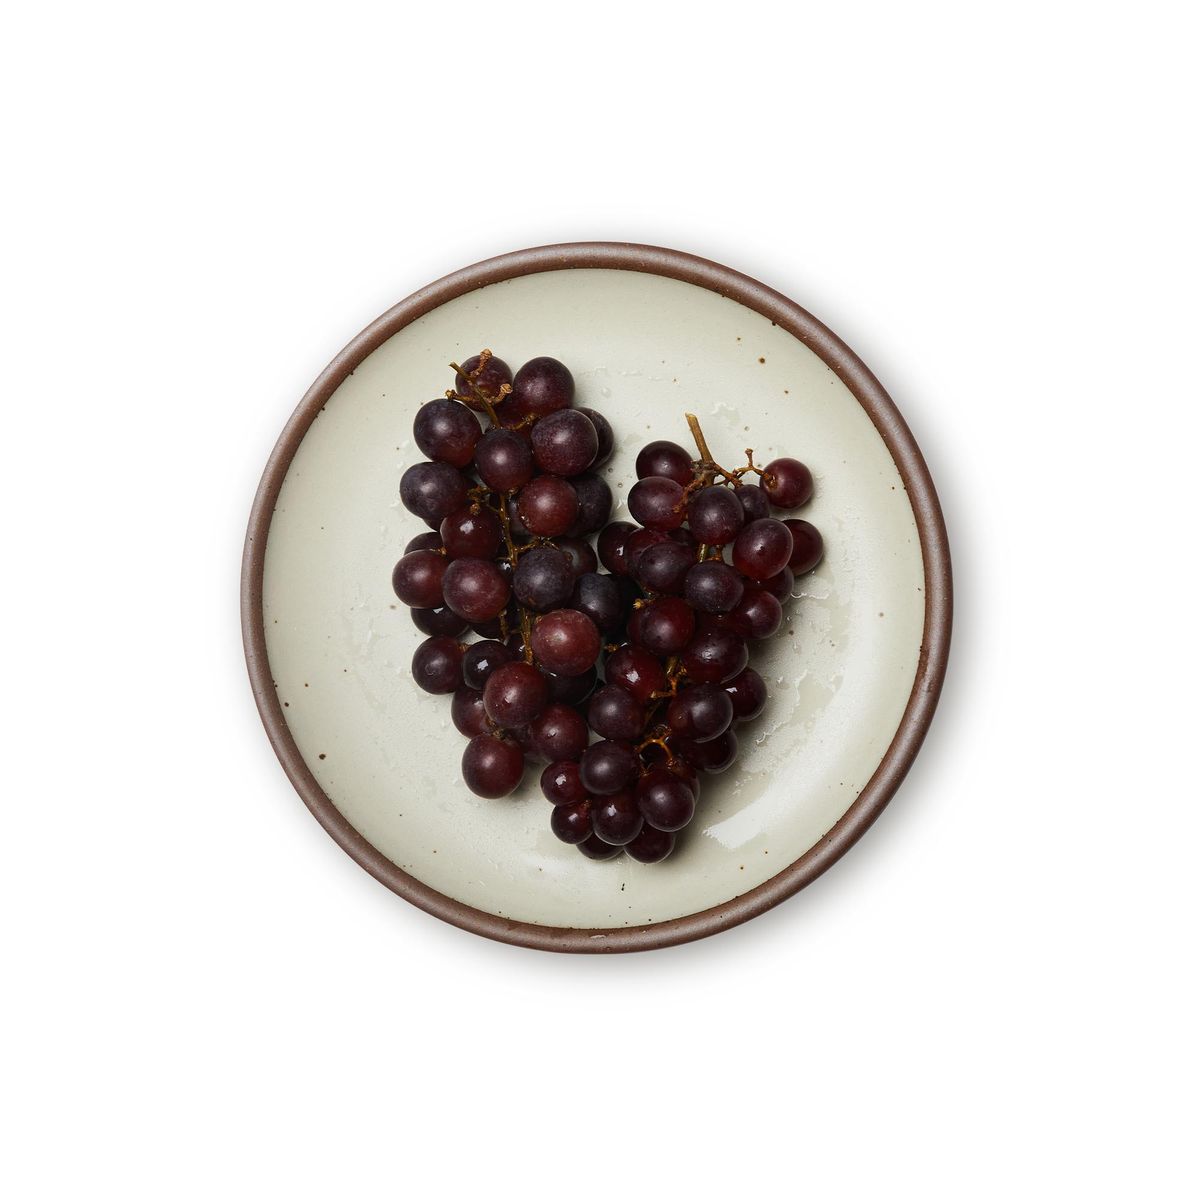 Grapes on a dinner sized ceramic plate in a warm, tan-toned, off-white color featuring iron speckles and an unglazed rim.